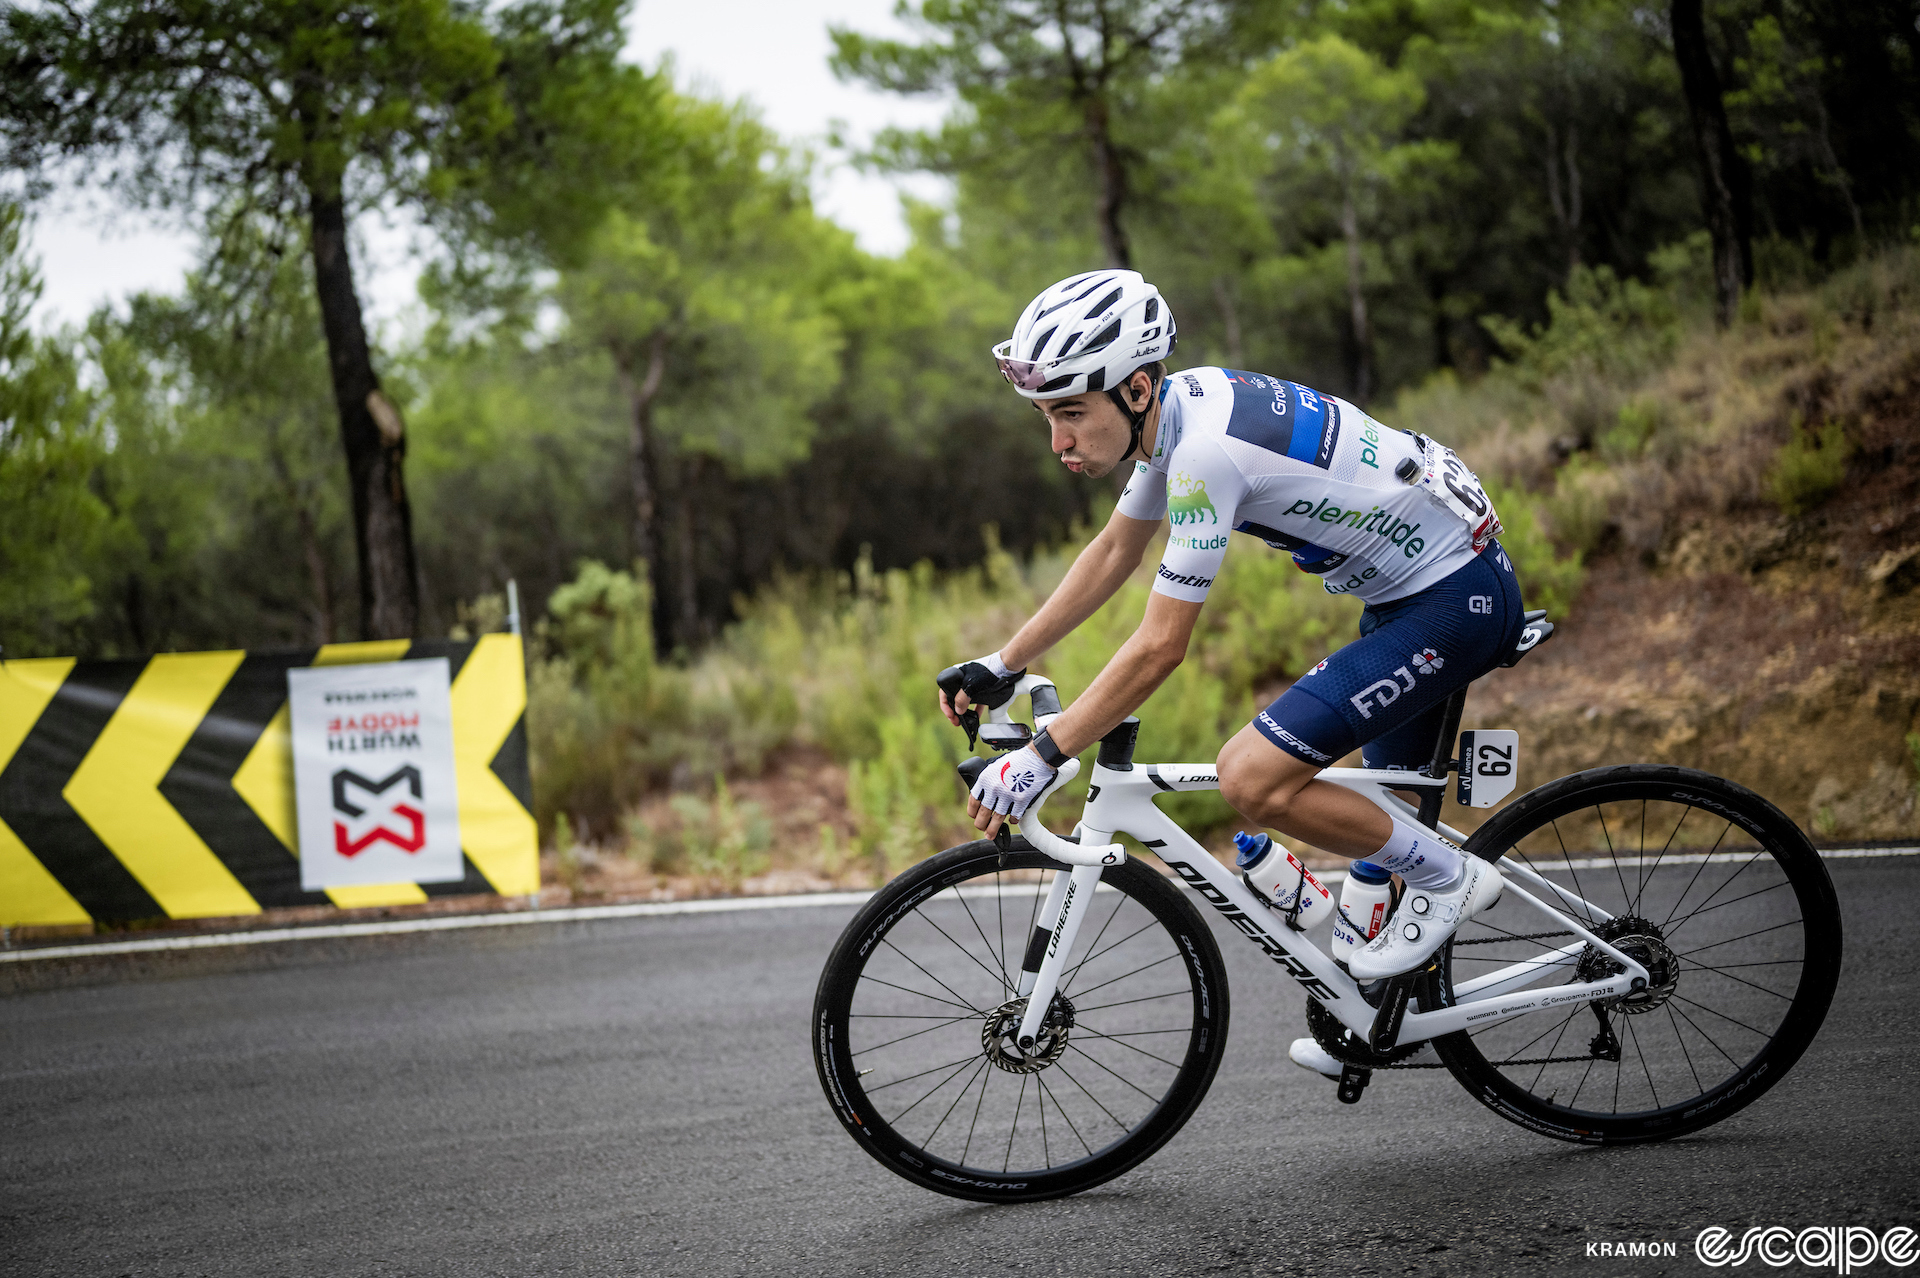 Lenny Martinez rides a climb at the 2023 Vuelta España. He's wearing the white jersey of the race's best young rider.